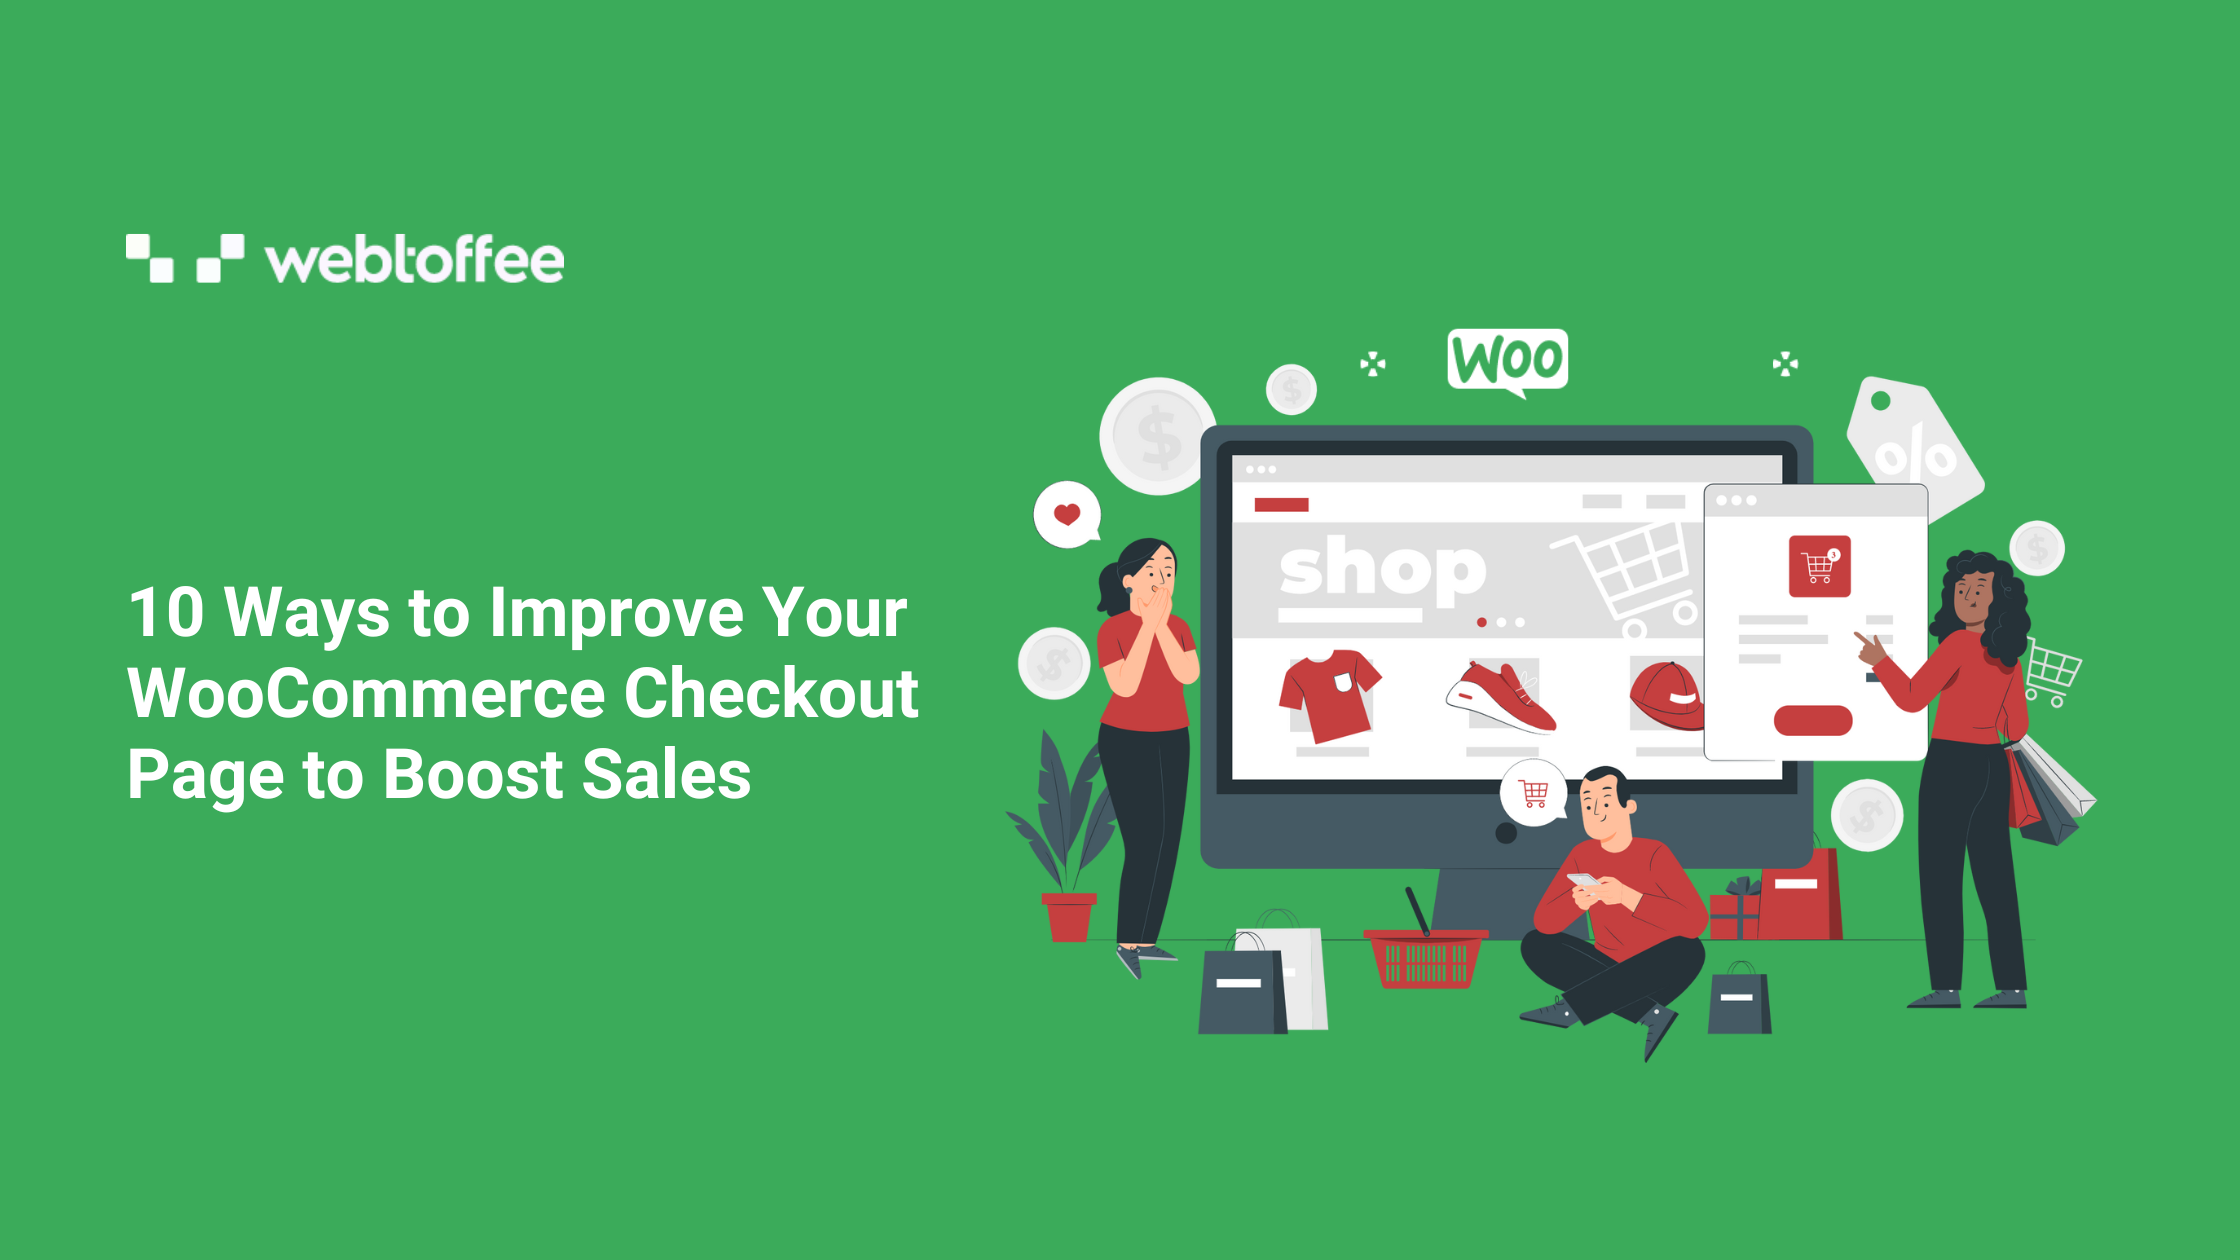 10 ways to improve your WooCommerce checkout page to boost sales